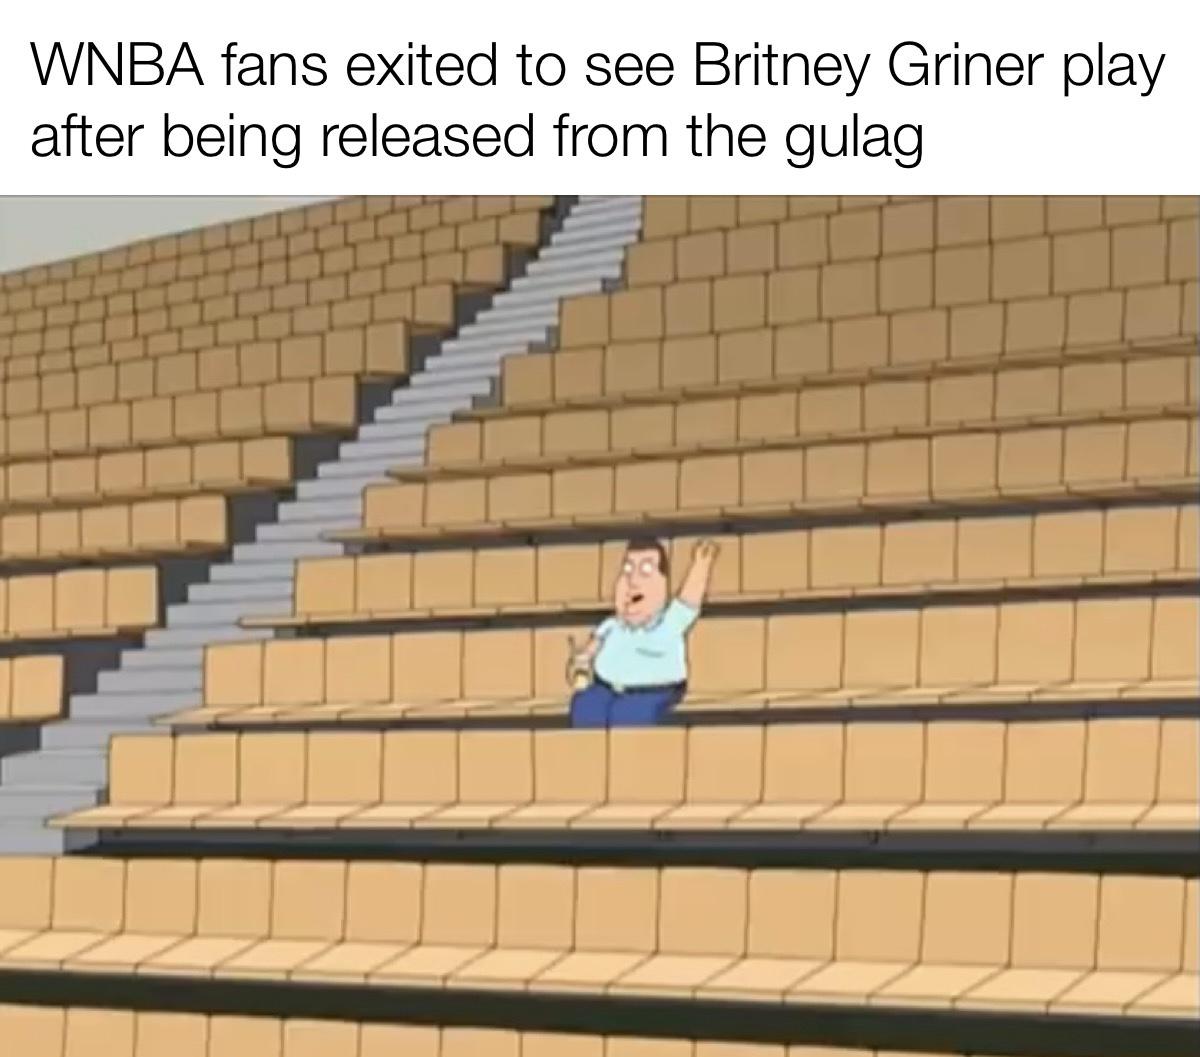 monday morning randomness - material - Wnba fans exited to see Britney Griner play after being released from the gulag